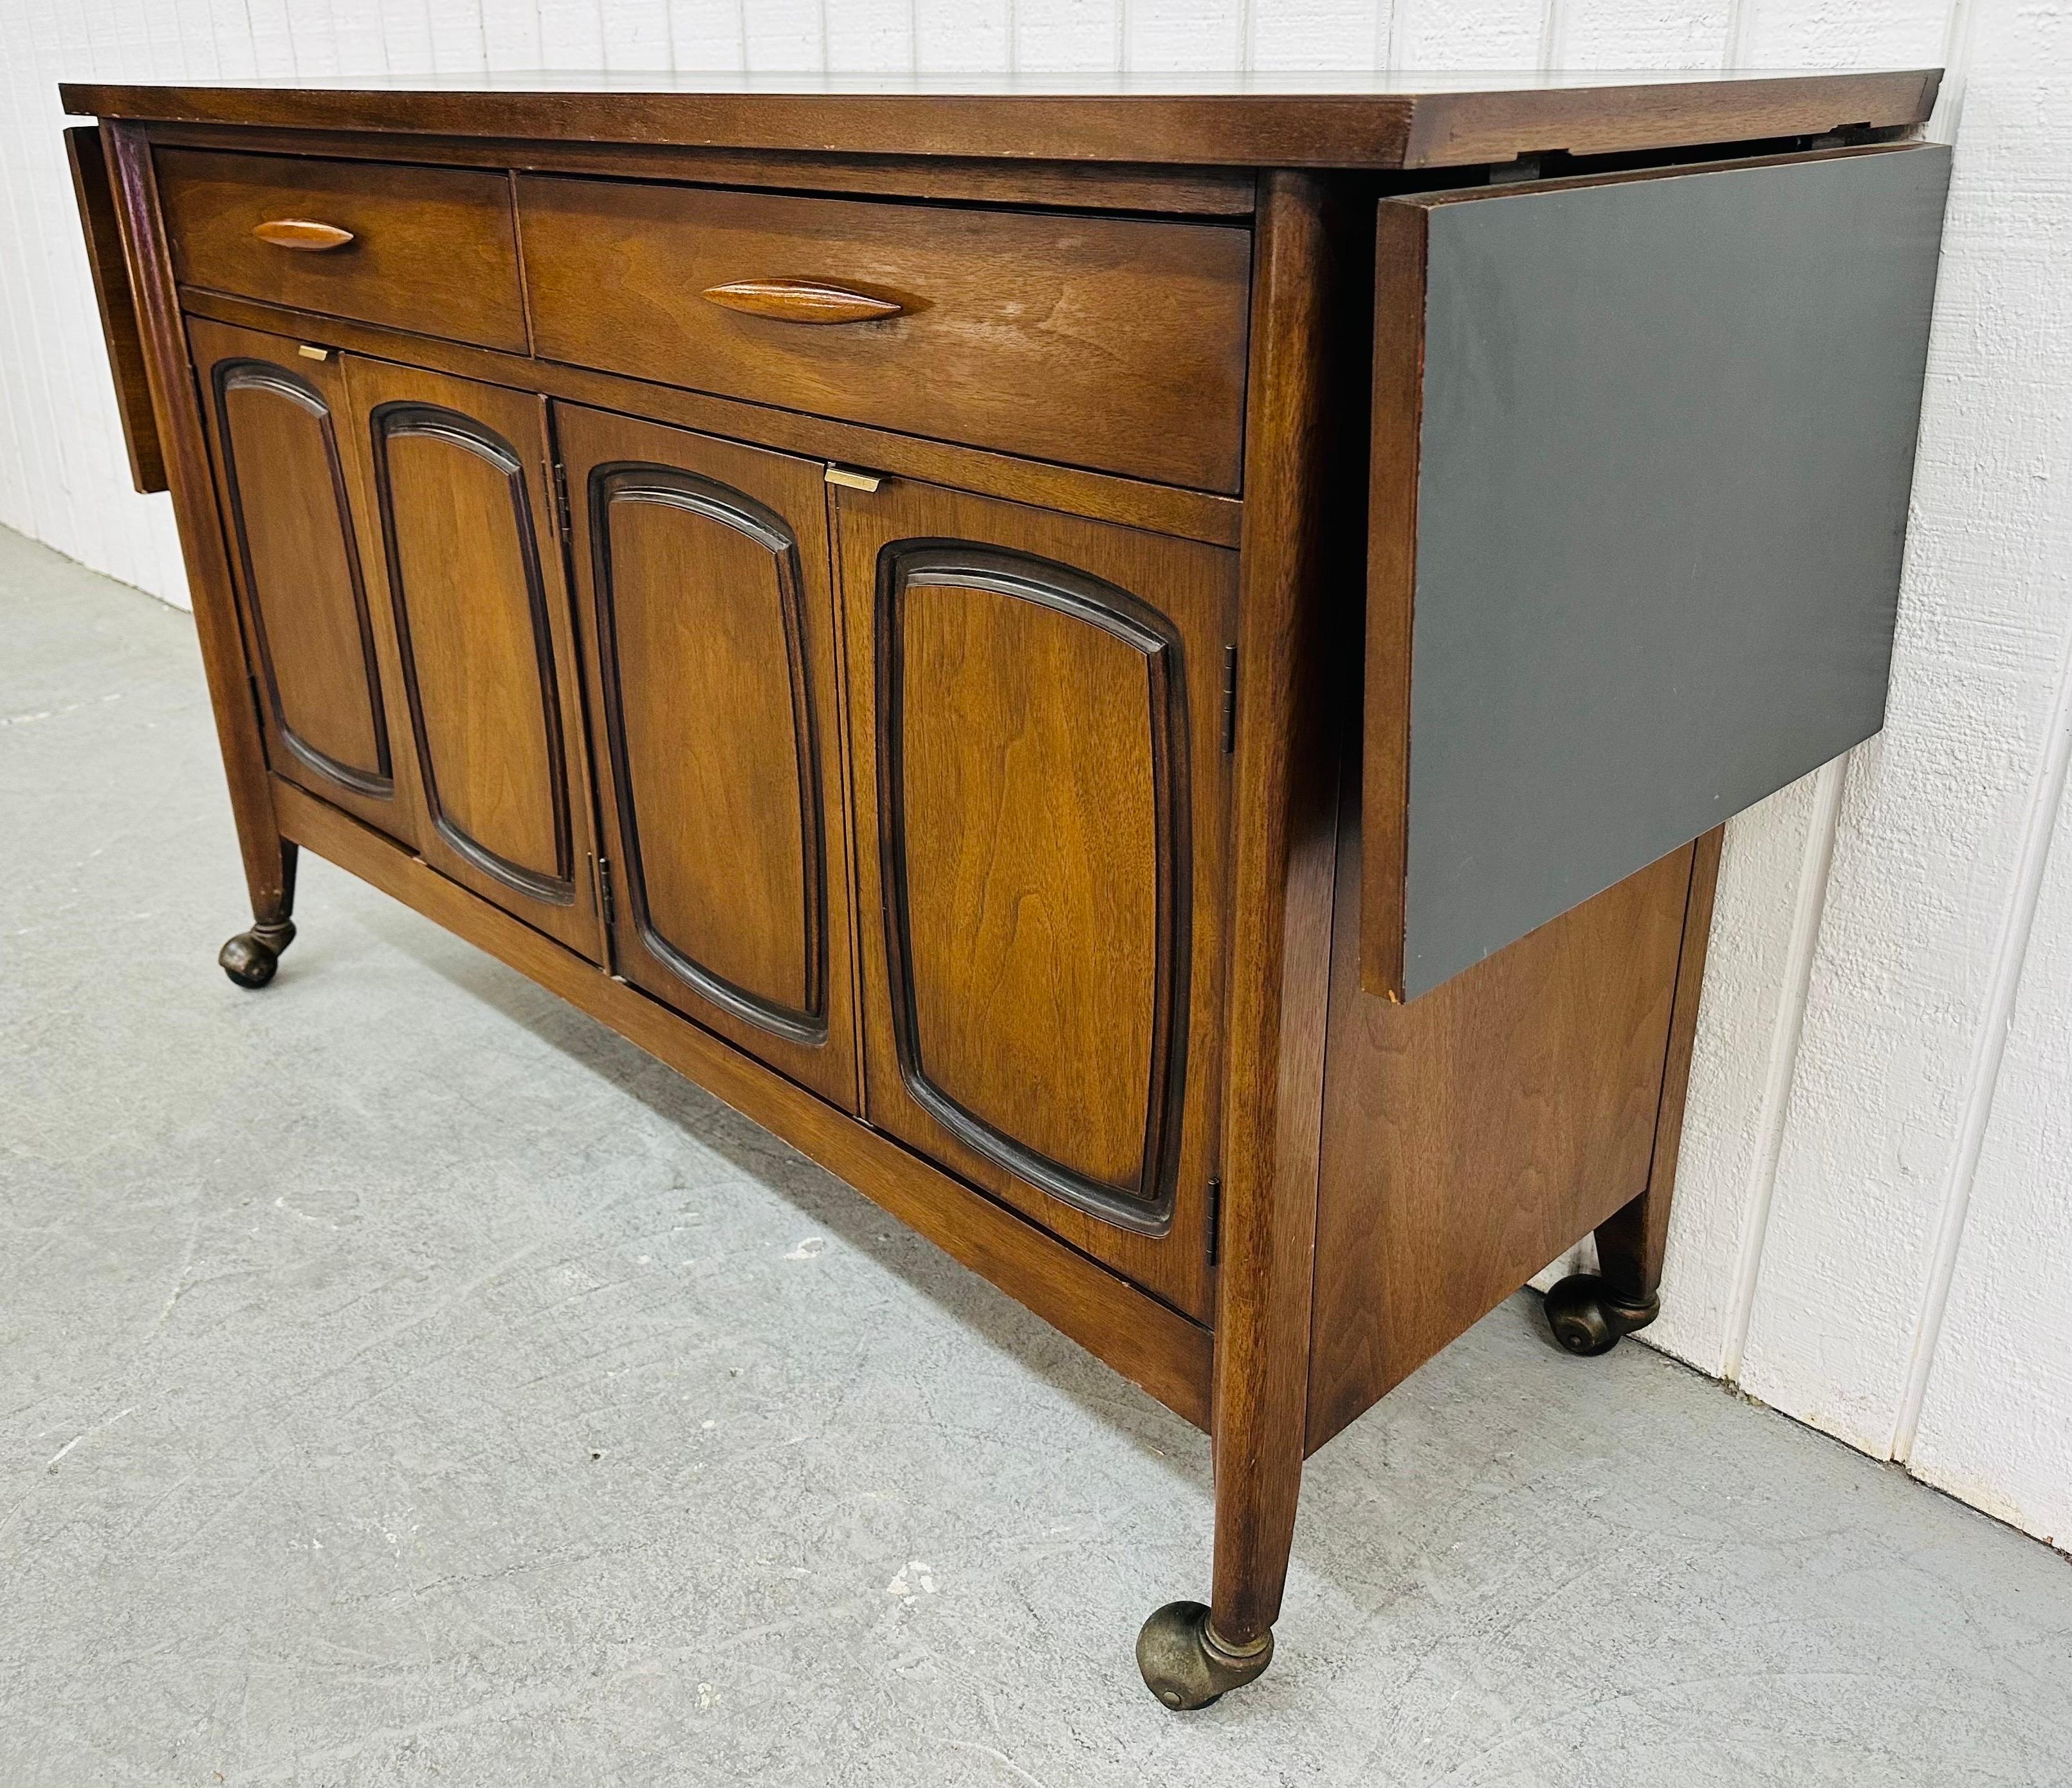 This listing is for a Mid-Century Modern Broyhill Emphasis Walnut Bar Cart. Featuring a straight line design, rectangular laminated serving top that expands up to 70” L, two drawers with sculpted wooden pulls, four door that open up to storage